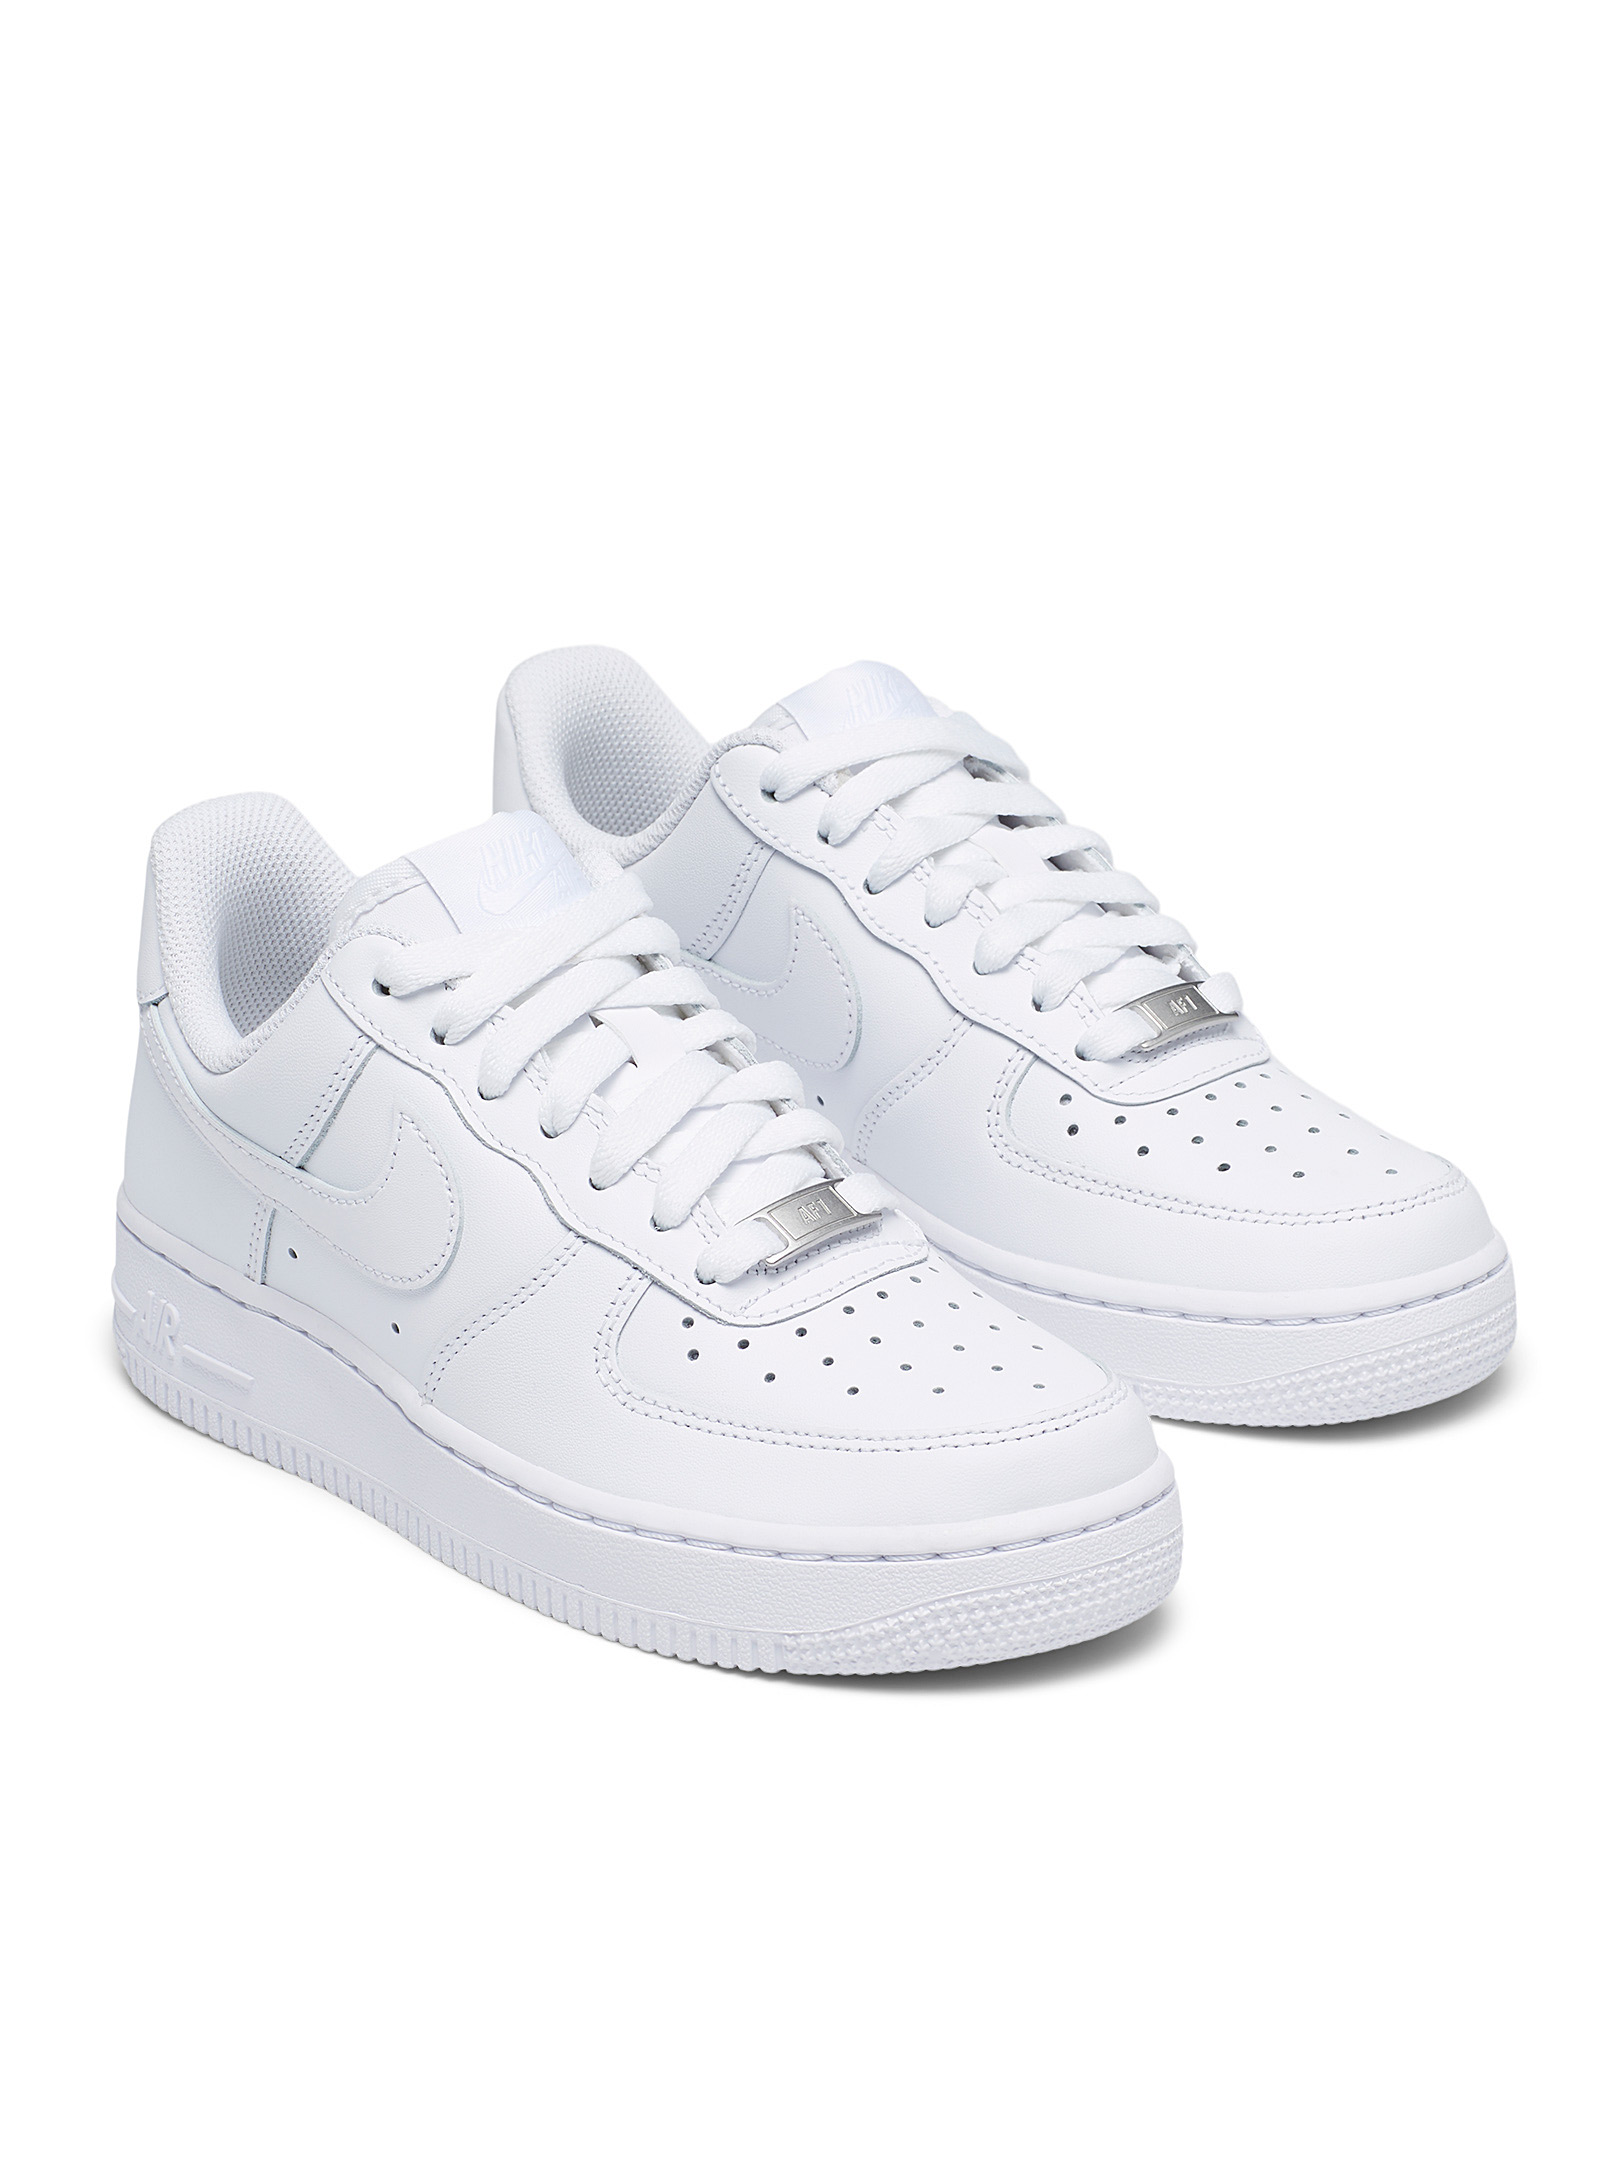 Nike - Chaussures Le Sneaker Air Force 1 '07 blanc Femme